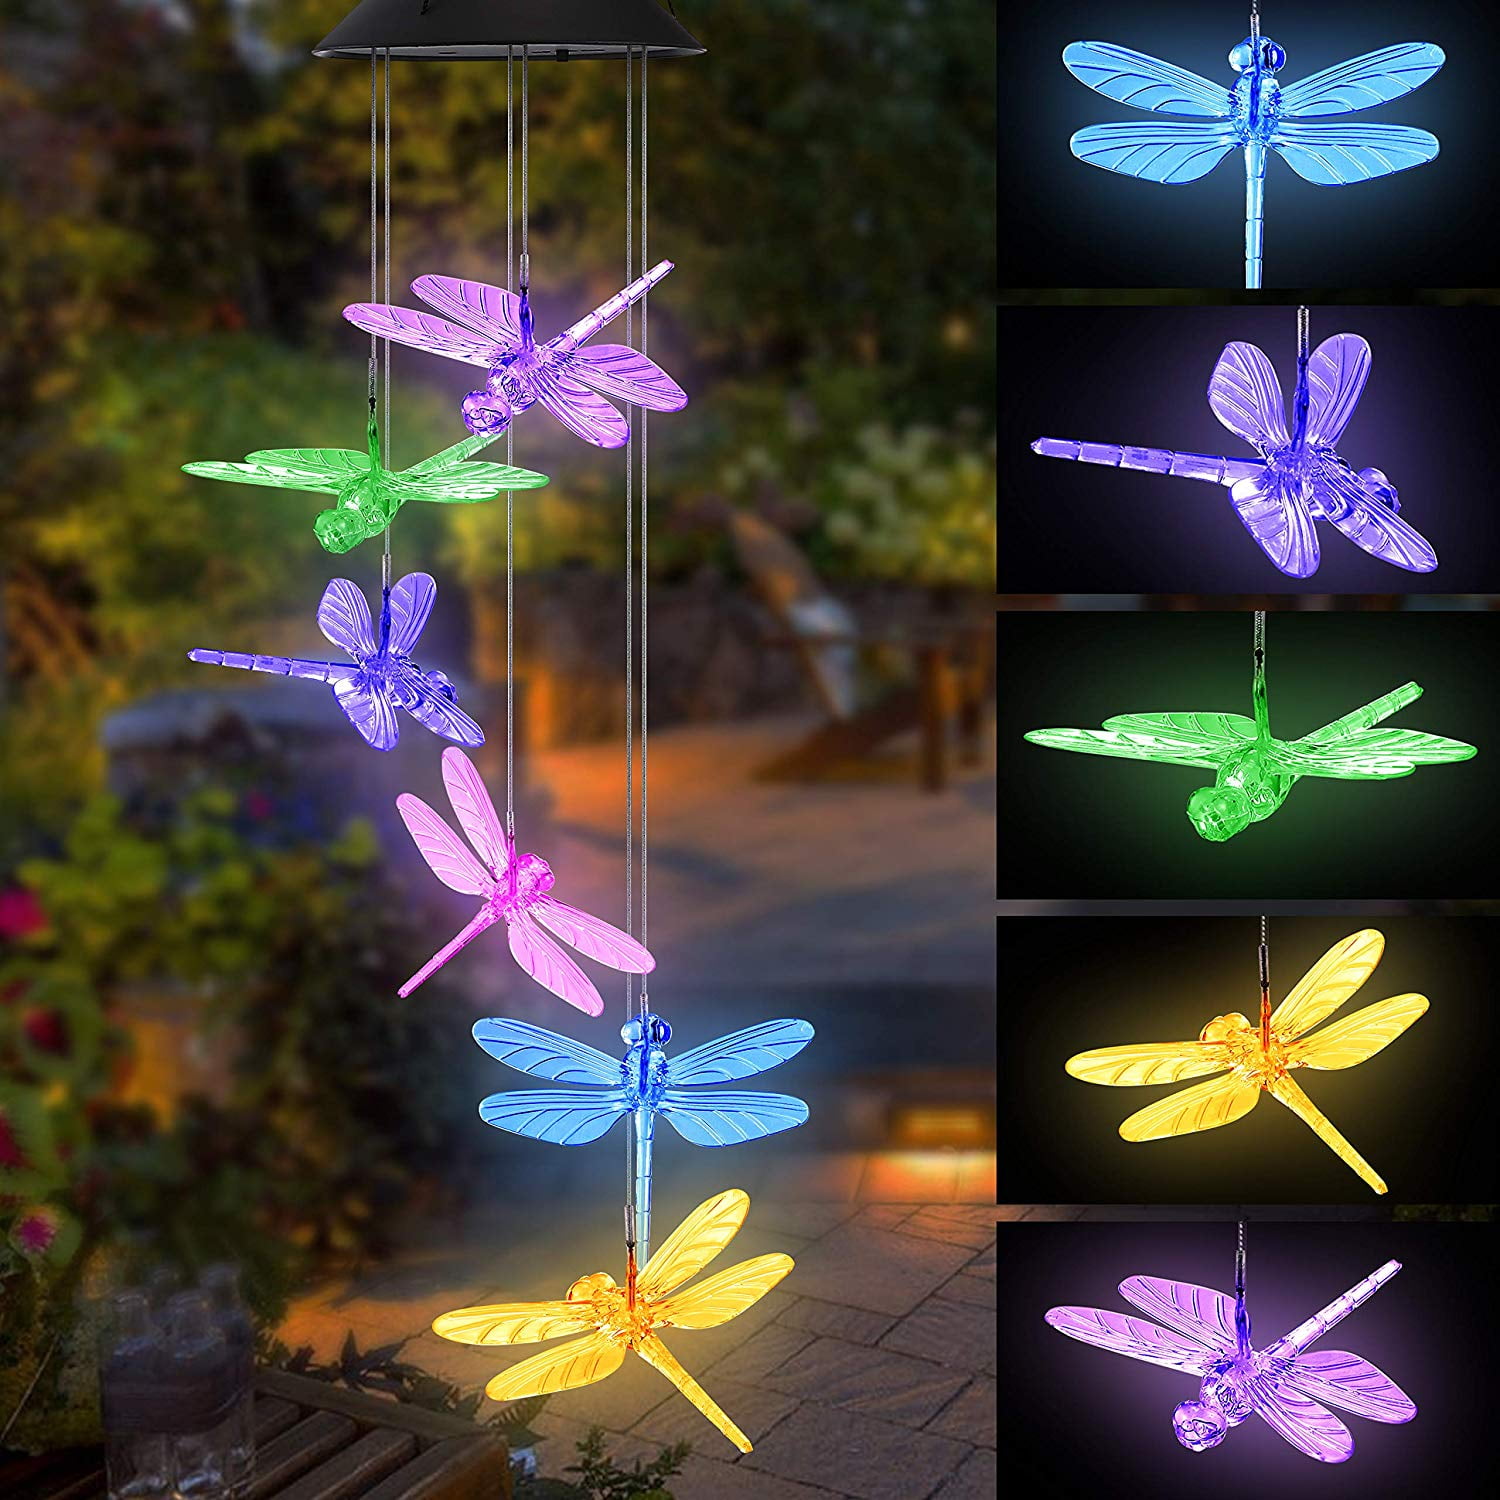 Solar Powered Color Changing Heart Wind Chimes Home Garden Yard Decor Light Lamp 